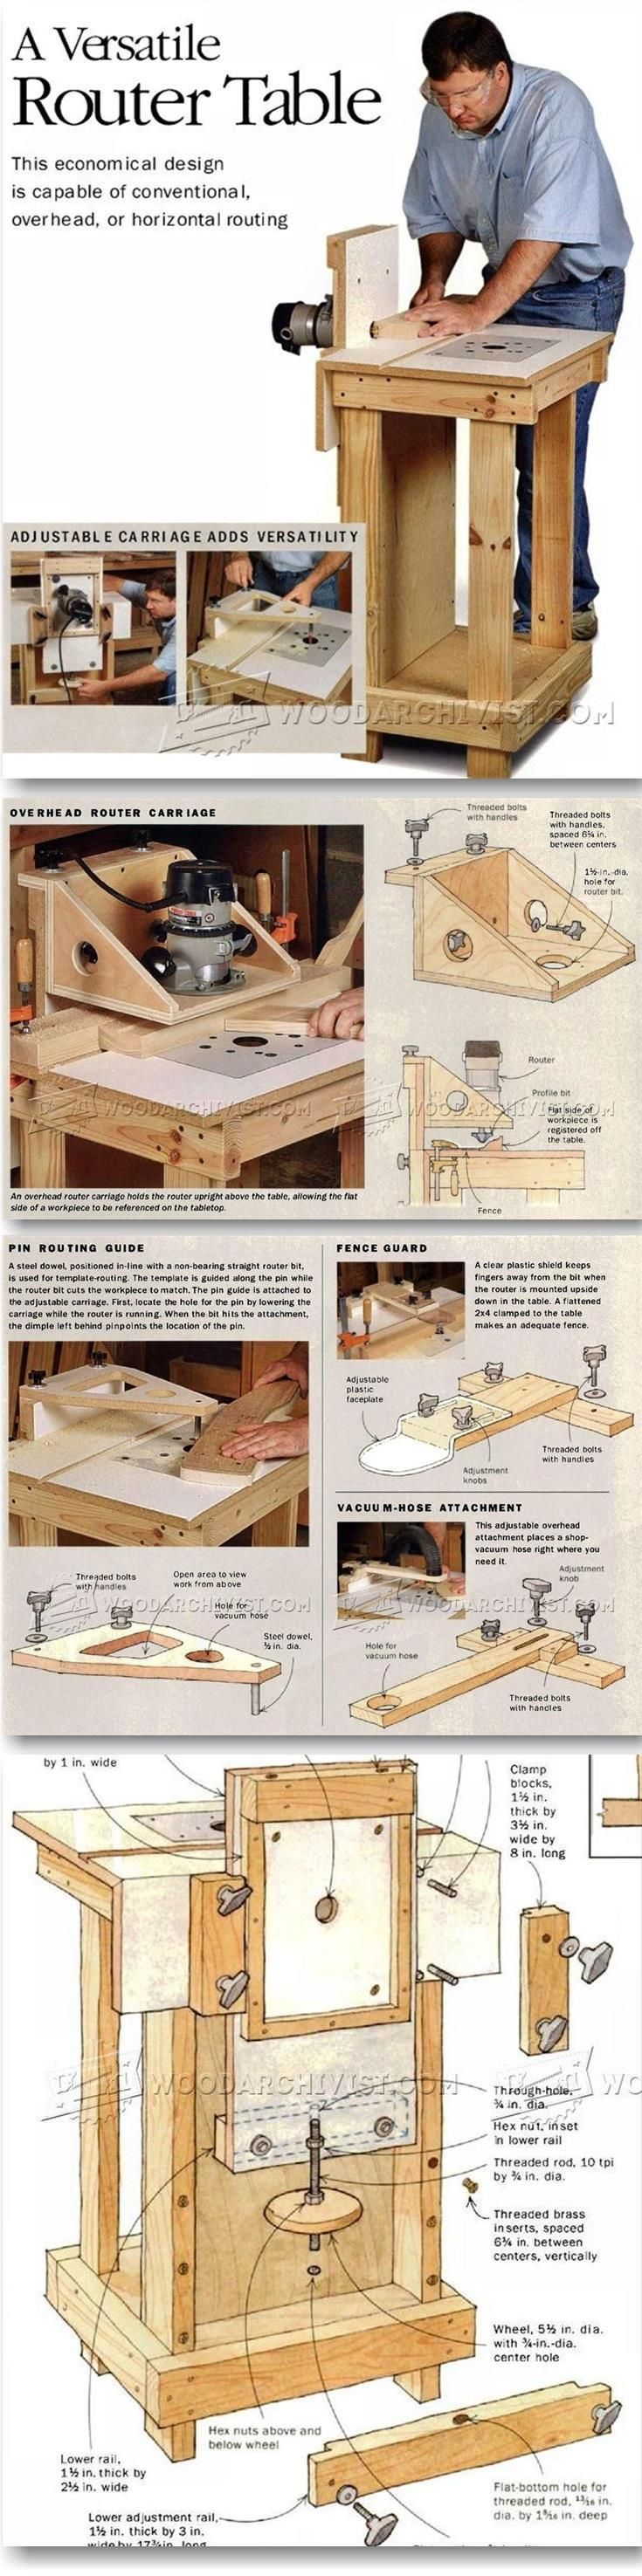 Horizontal Router Table Plans – Router Tips, Jigs and Fixtures | WoodArchivist.com